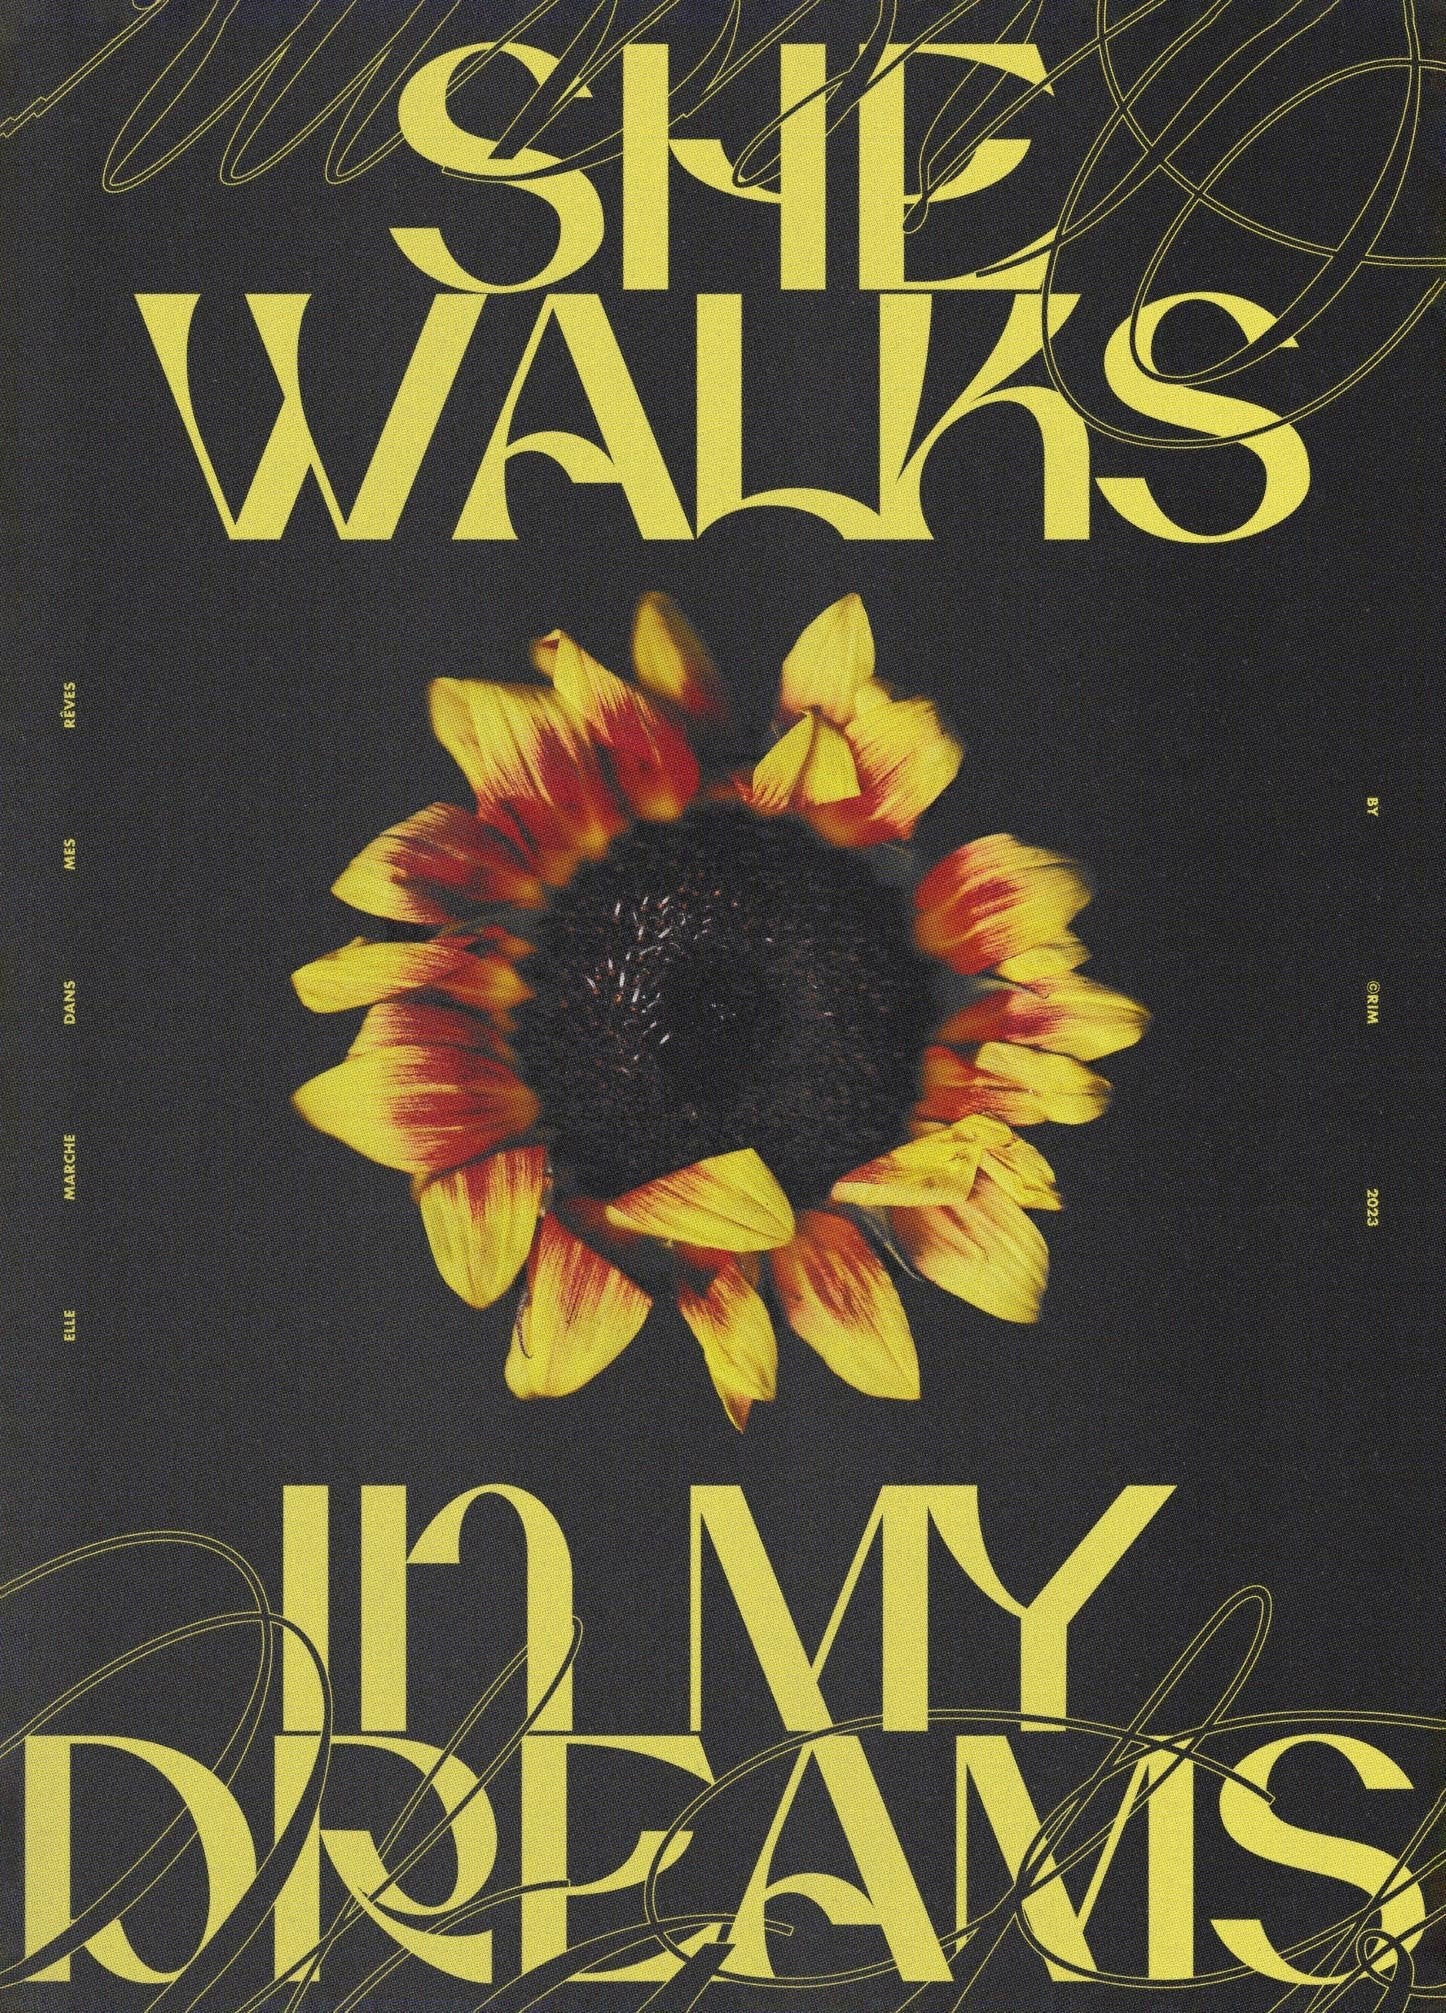 the cover of i am my dreams by she walks